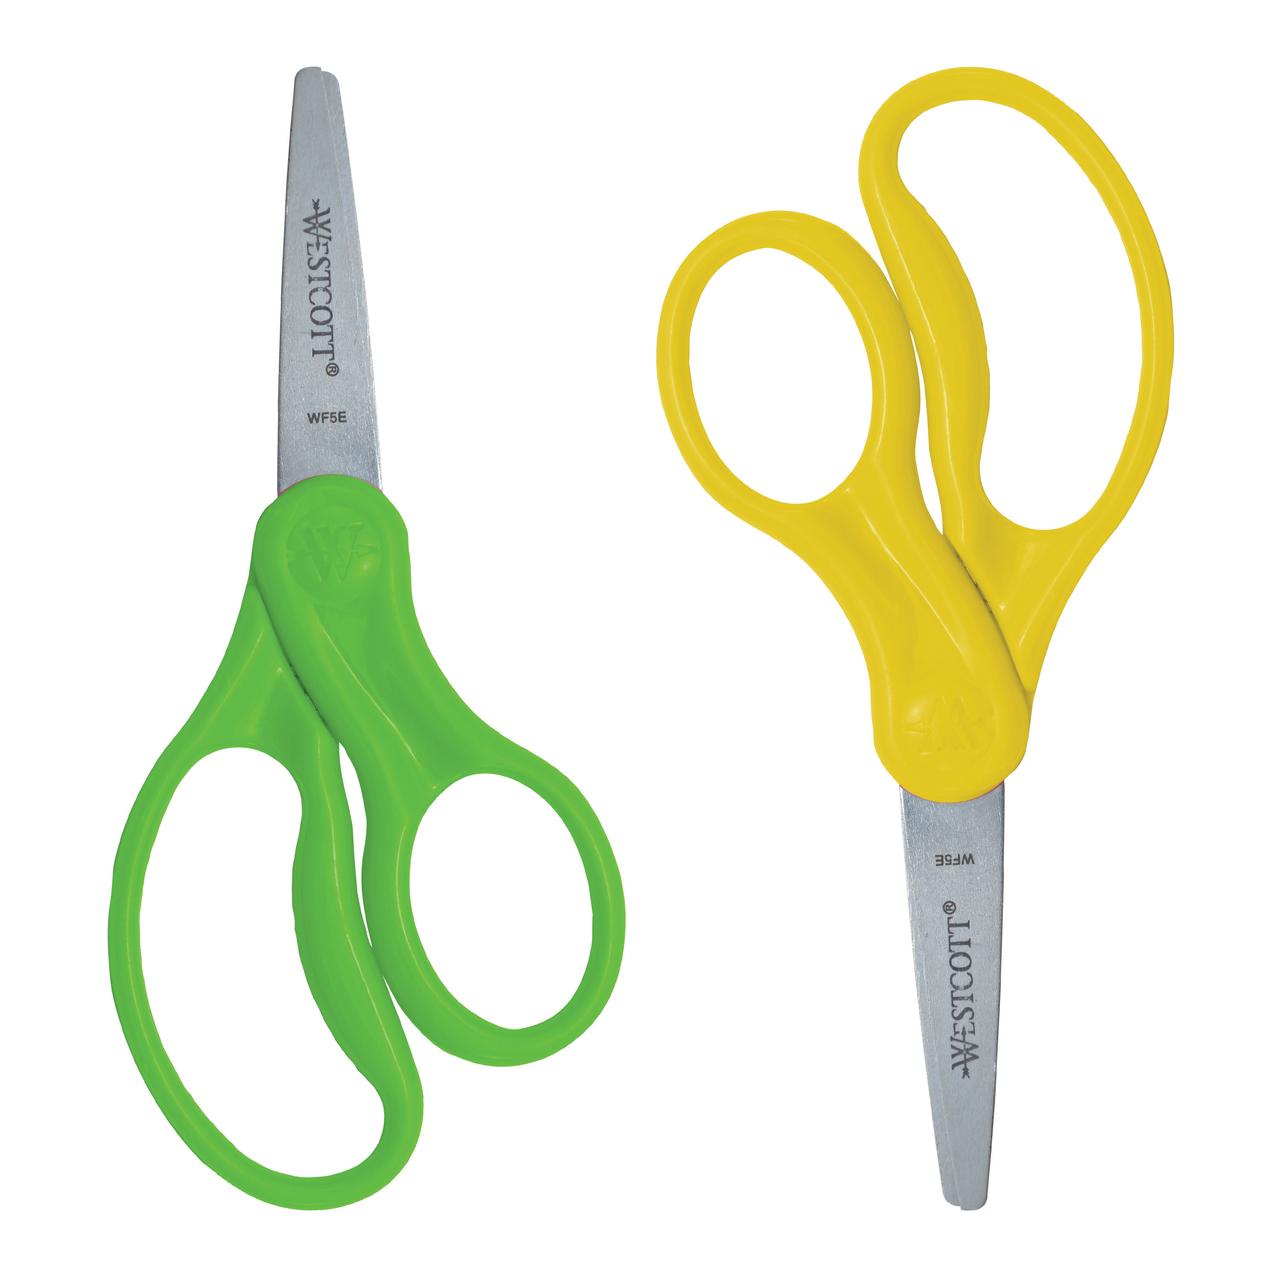 Westcott® Hard Handle Kids Value Scissors, 5", Pointed, Assorted Colors, 2 Pack - image 3 of 9